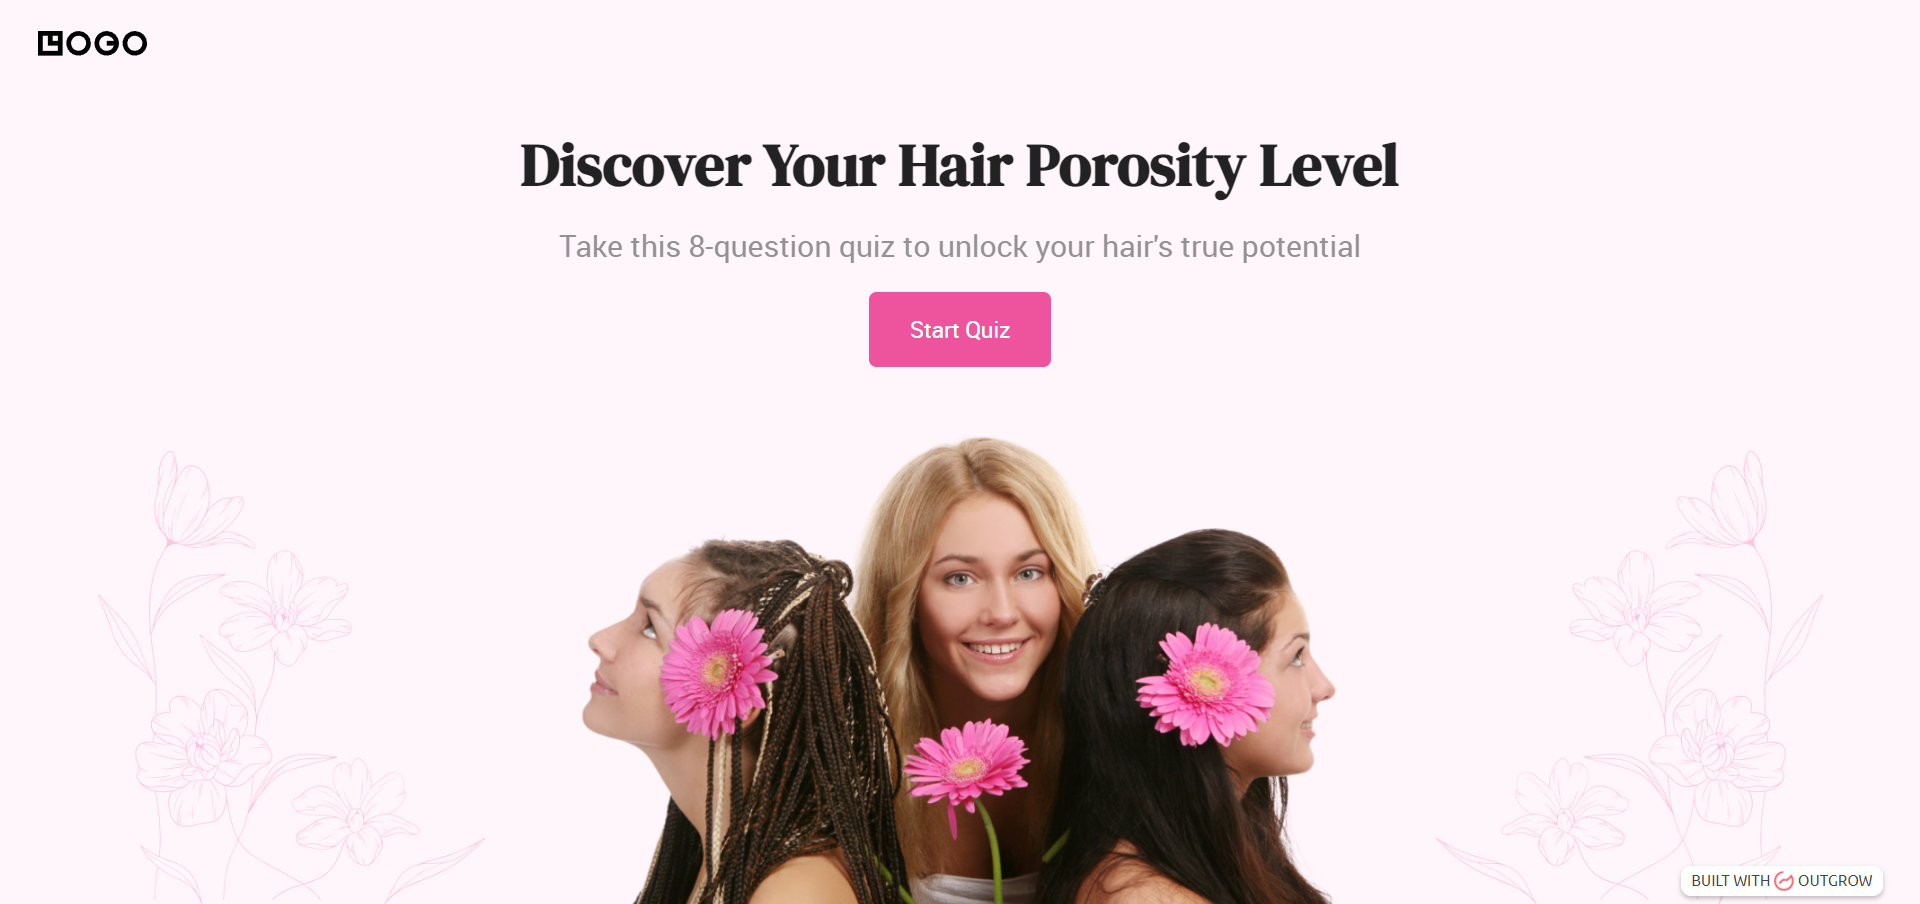 Discover Your Hair Porosity Level